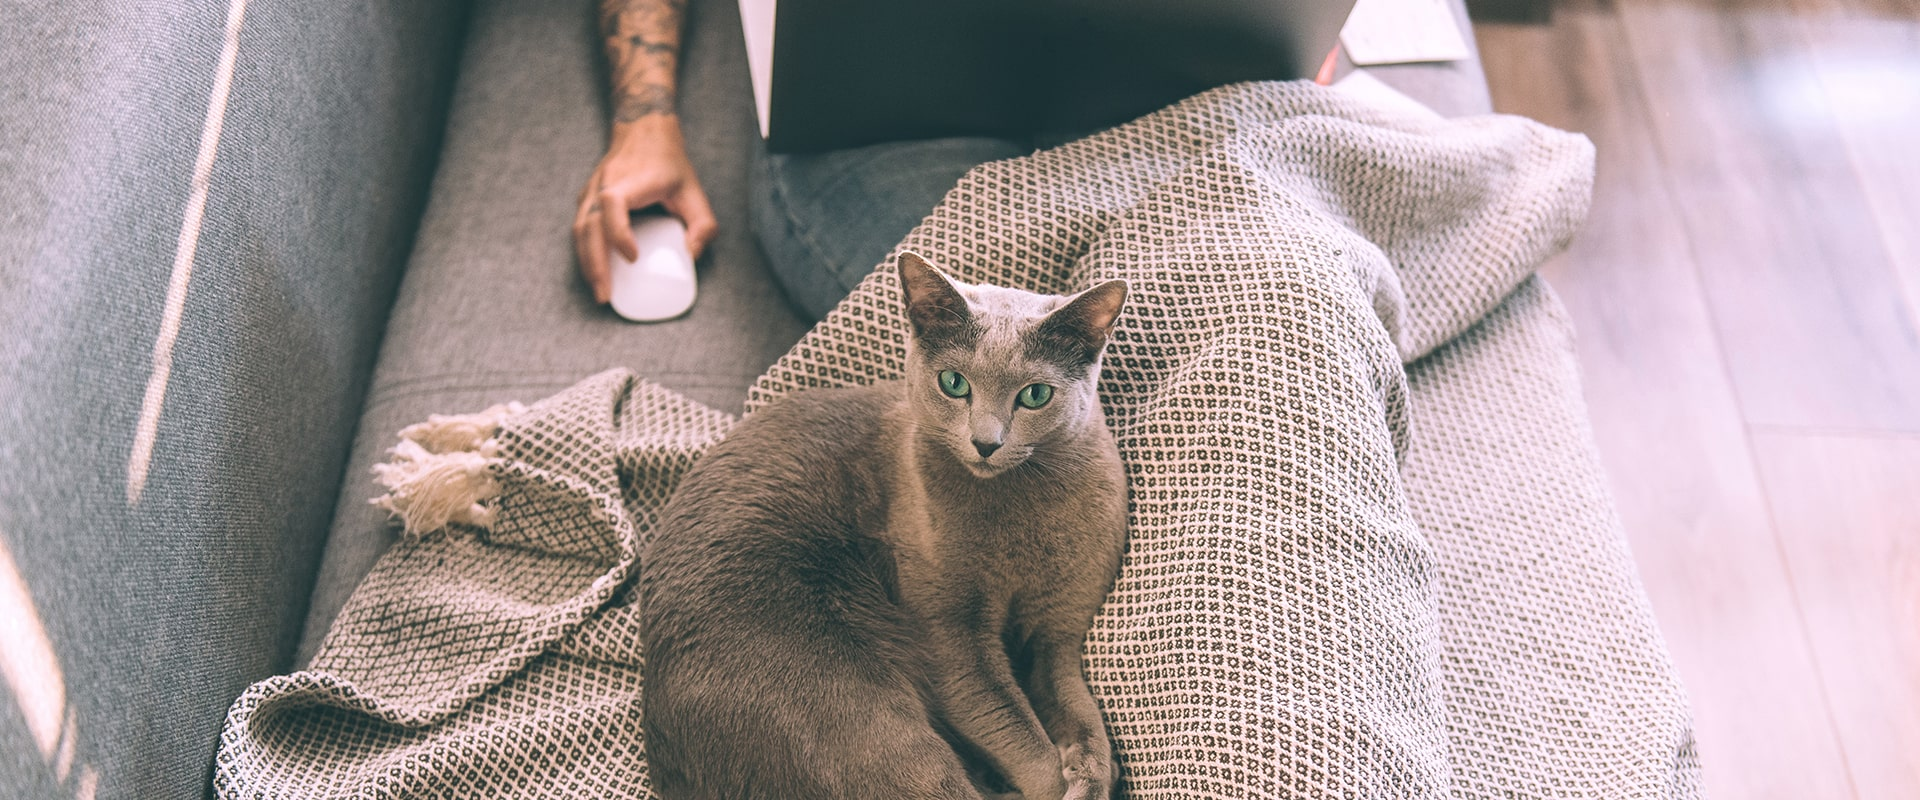 russian blue cat laying on a blanket over its owners legs on the couch